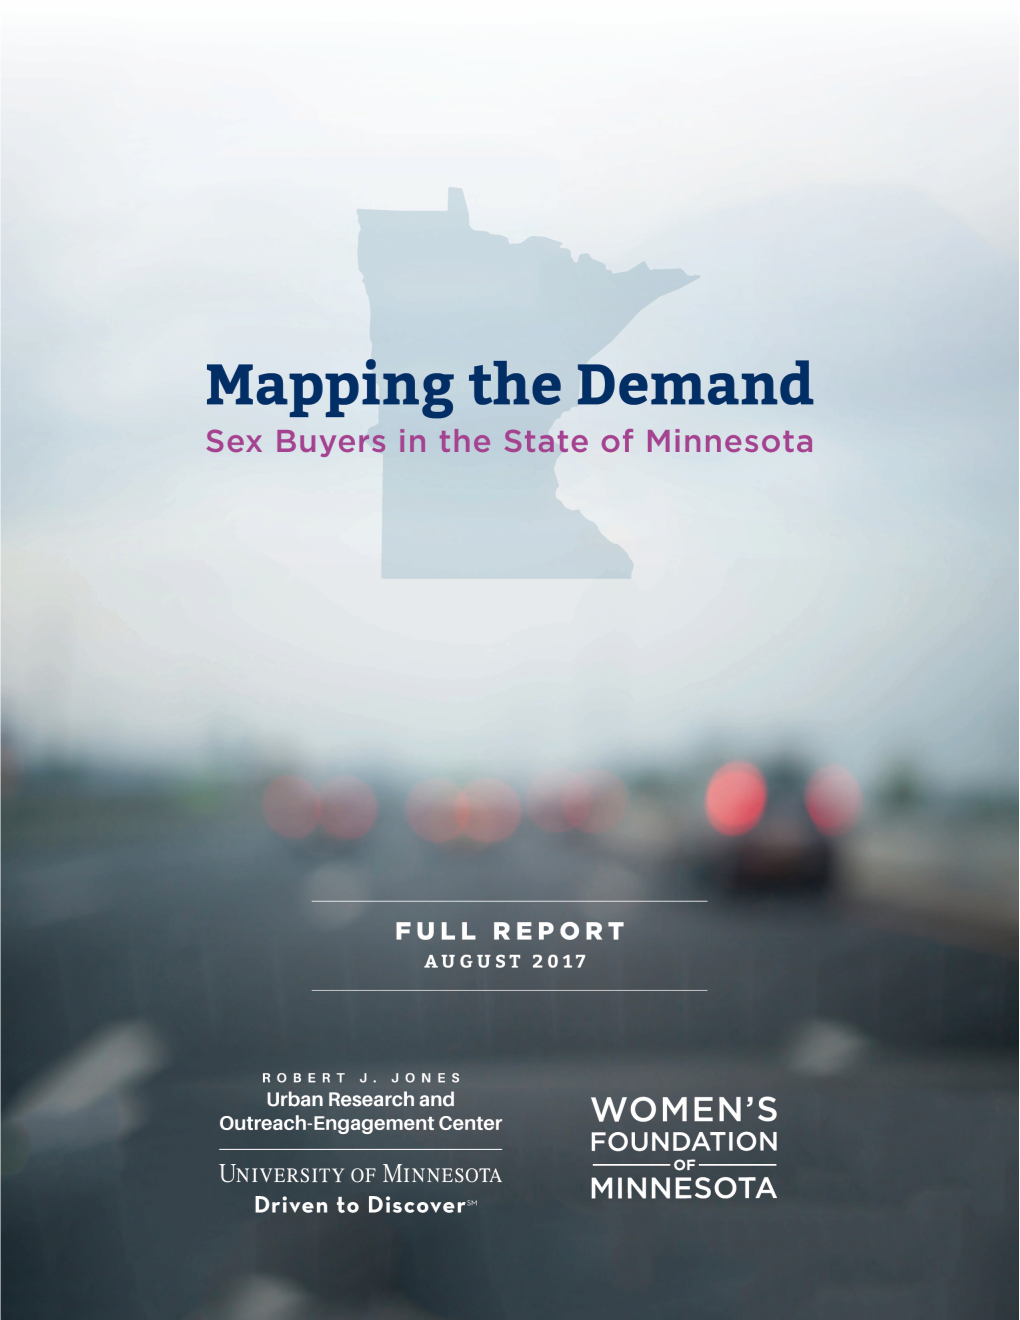 Mapping the Demand: Sex Buyers in the State of Minnesota